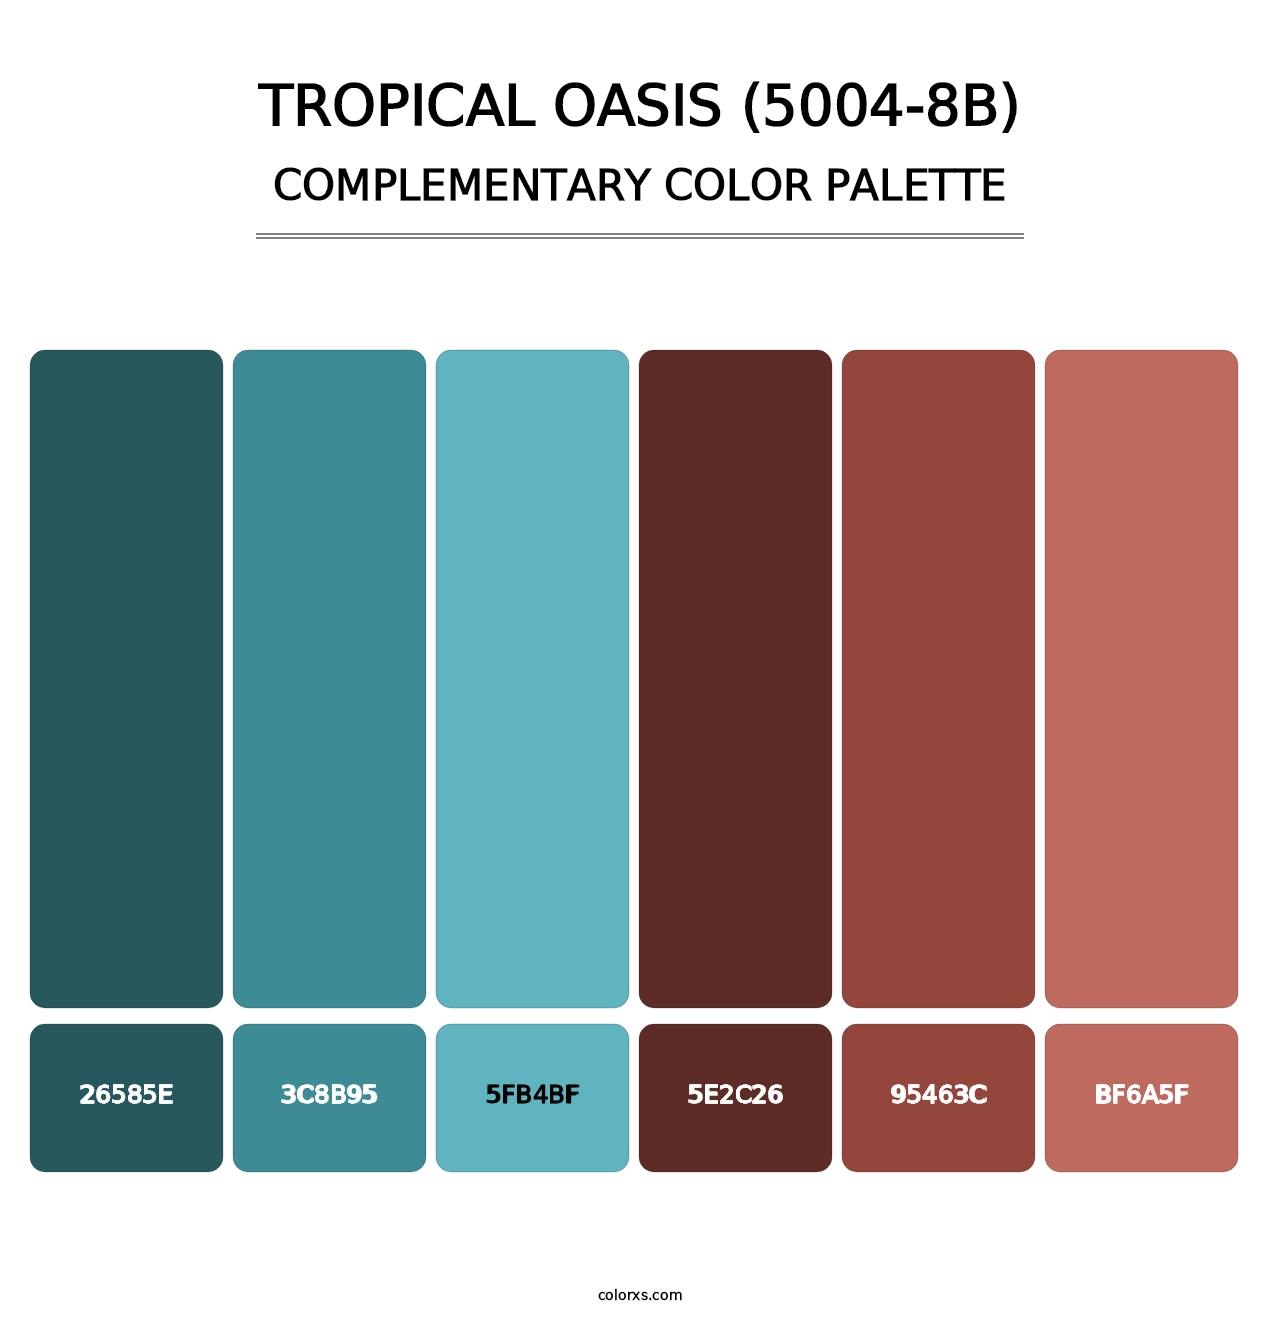 Tropical Oasis (5004-8B) - Complementary Color Palette